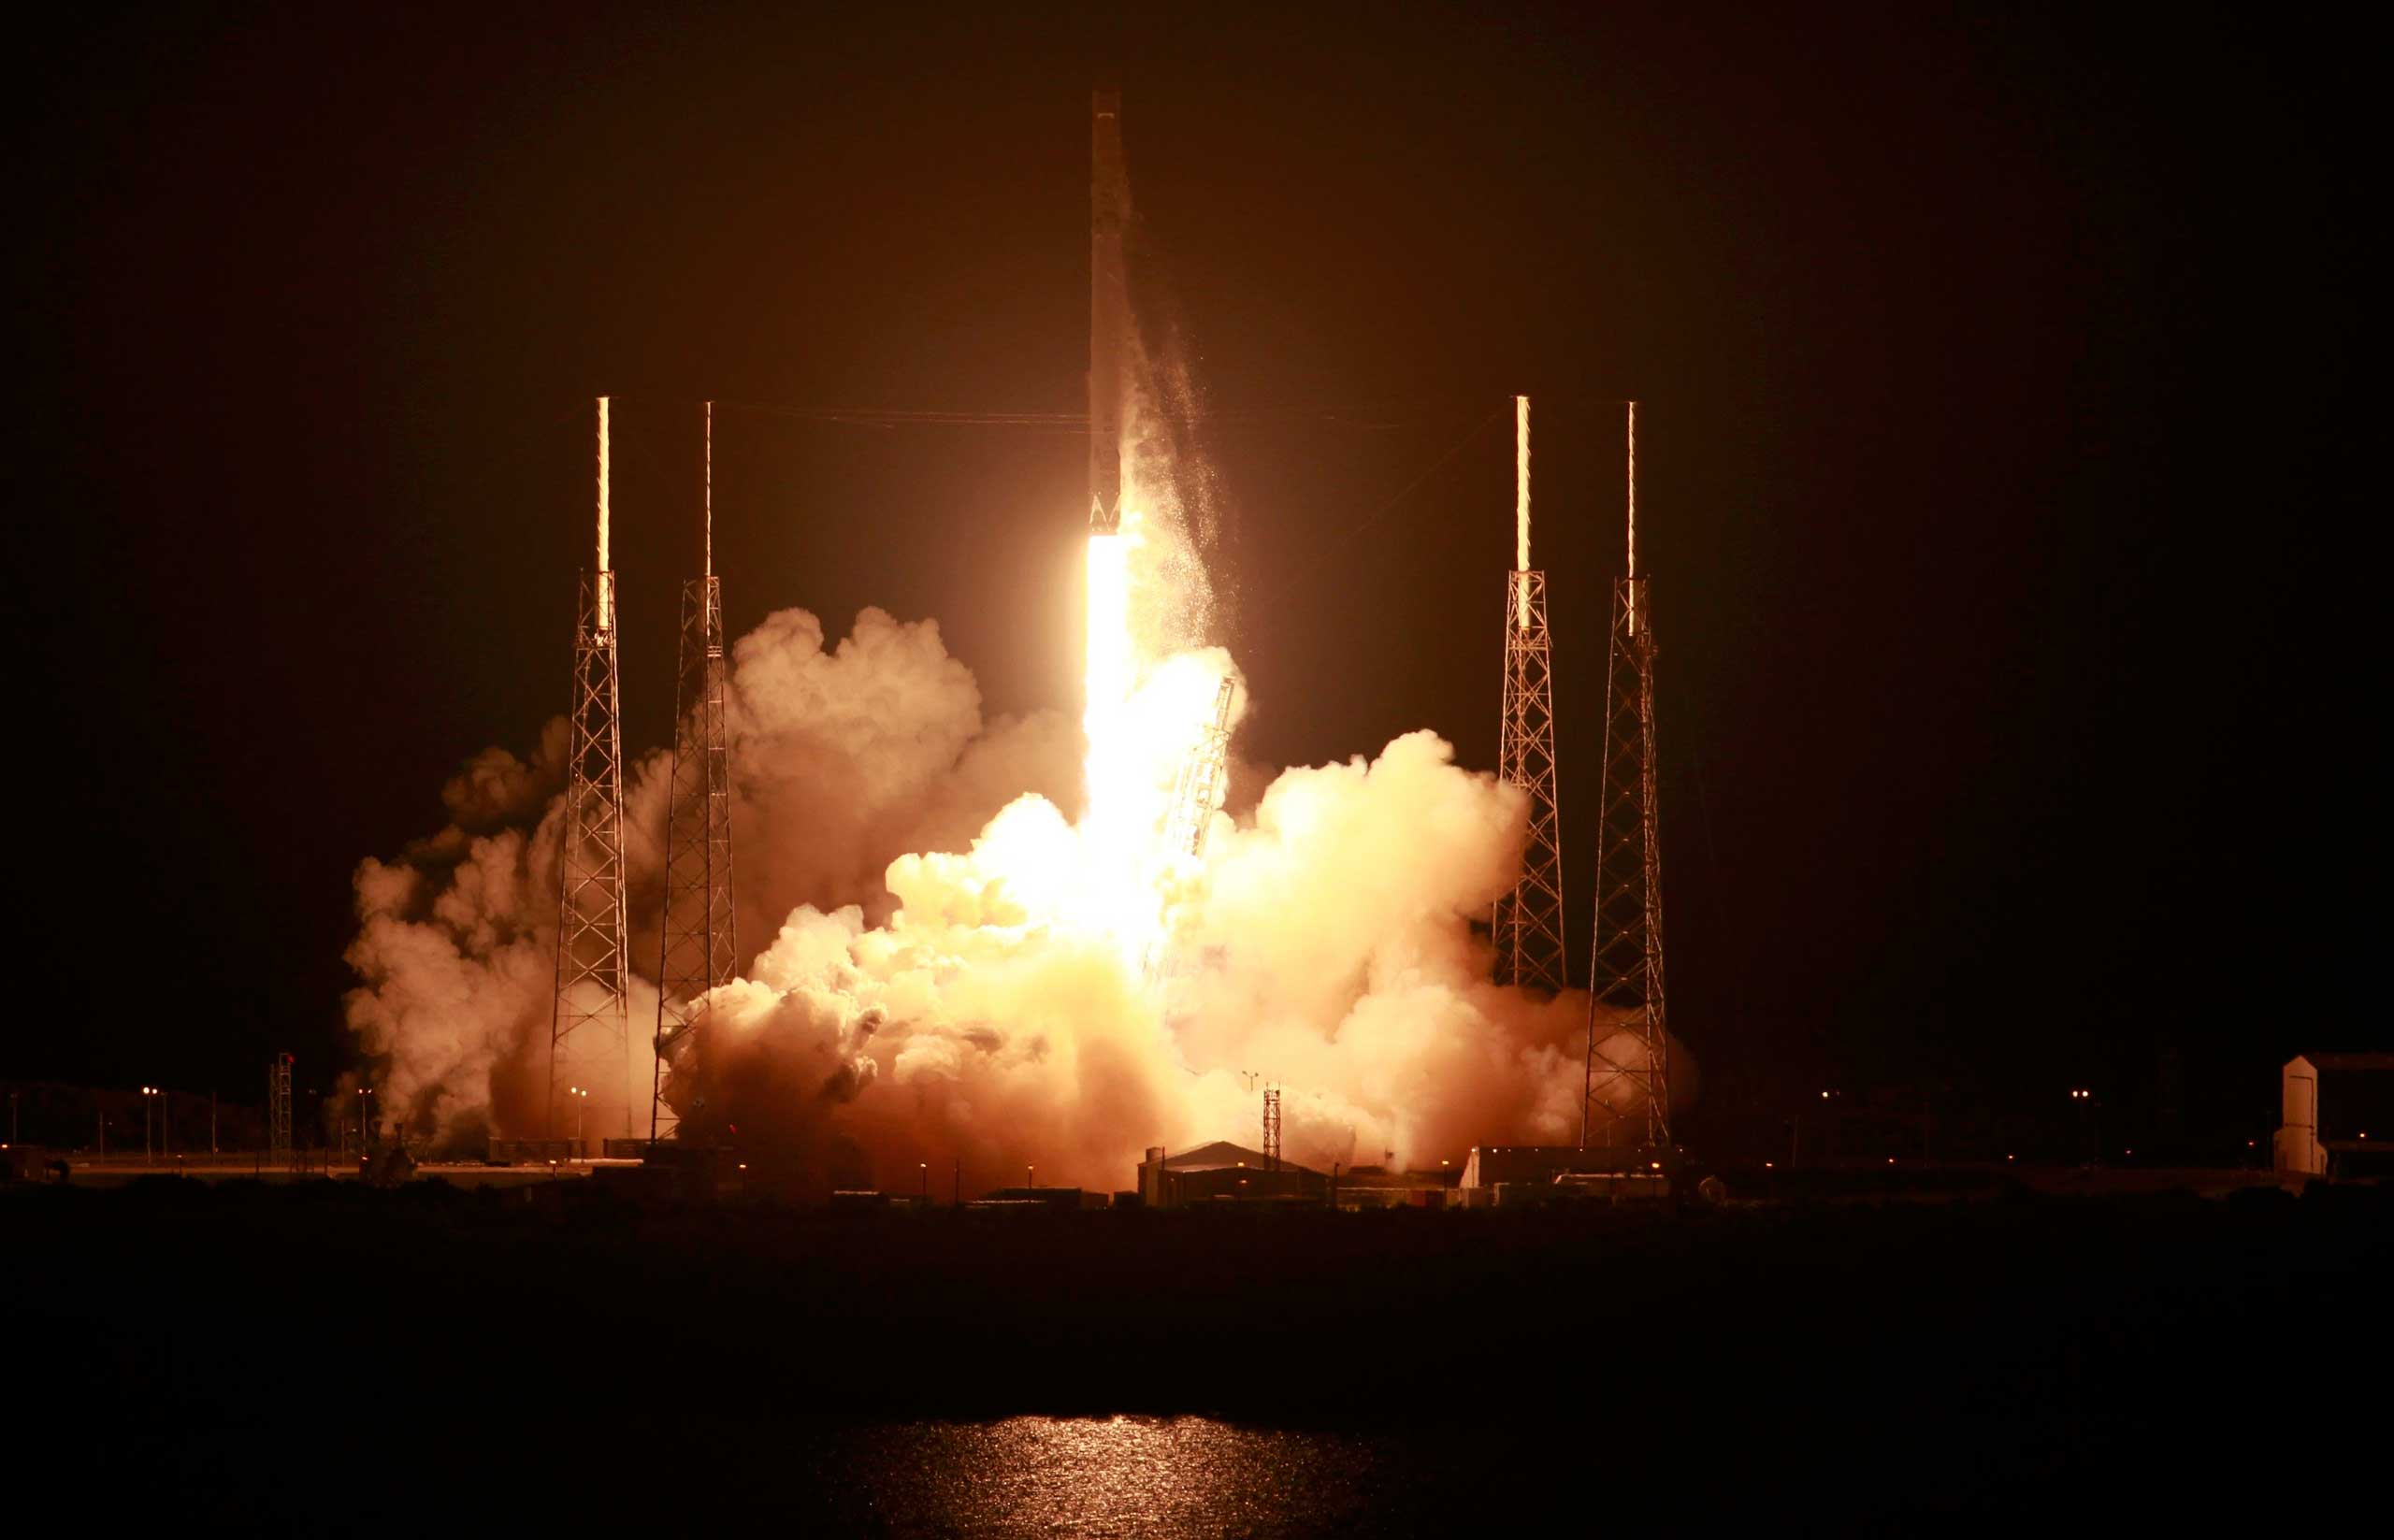 The unmanned Falcon 9 rocket launched by SpaceX on a cargo resupply service mission to the International Space Station lifts off from the Cape Canaveral Air Force Station in Cape Canaveral, Fla. on Jan. 10, 2015. (Mike Brown—Reuters)